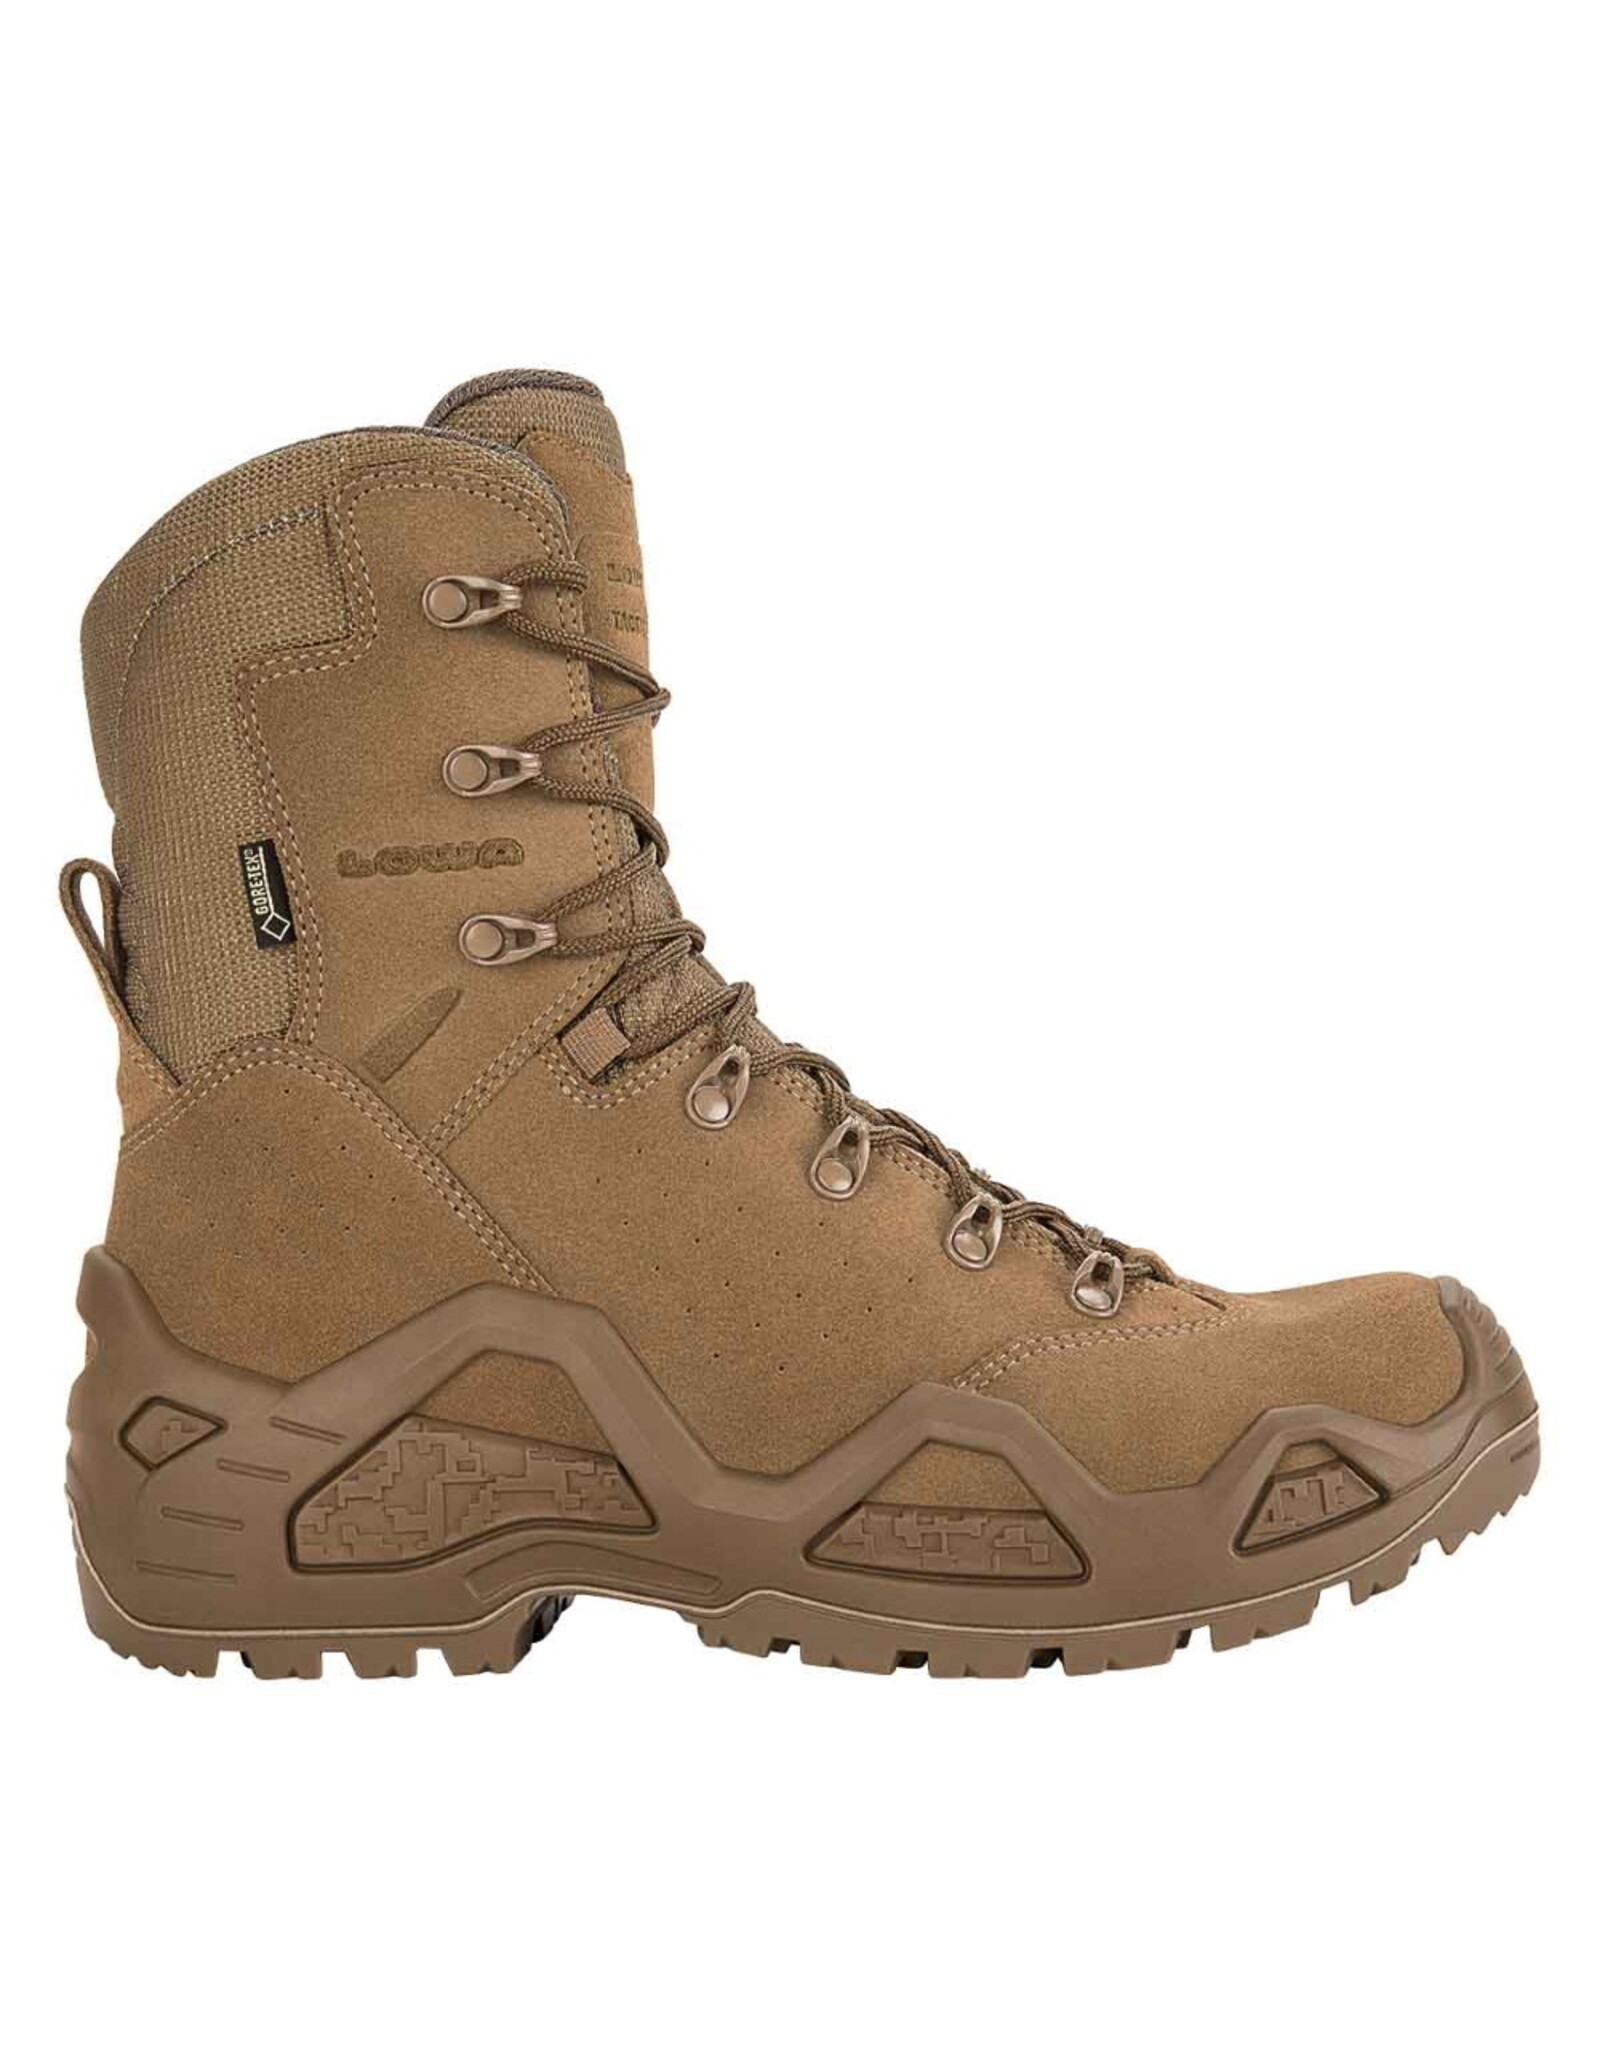 LOWA Z-8S GTX WS C COYOTE TACTICAL BOOT